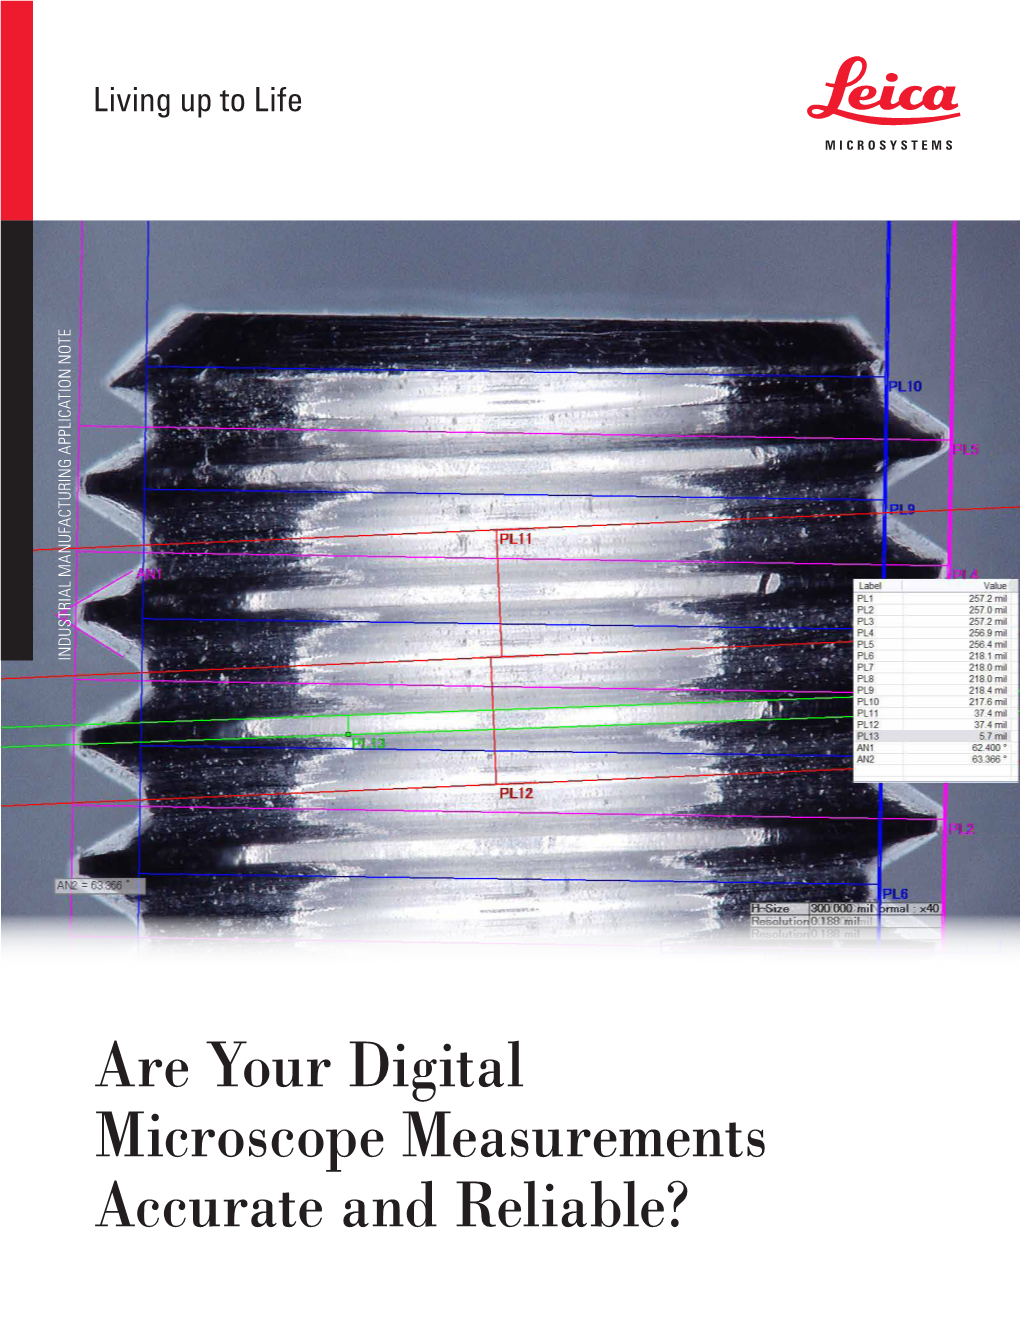 Are Your Digital Microscope Measurements Accurate and Reliable?